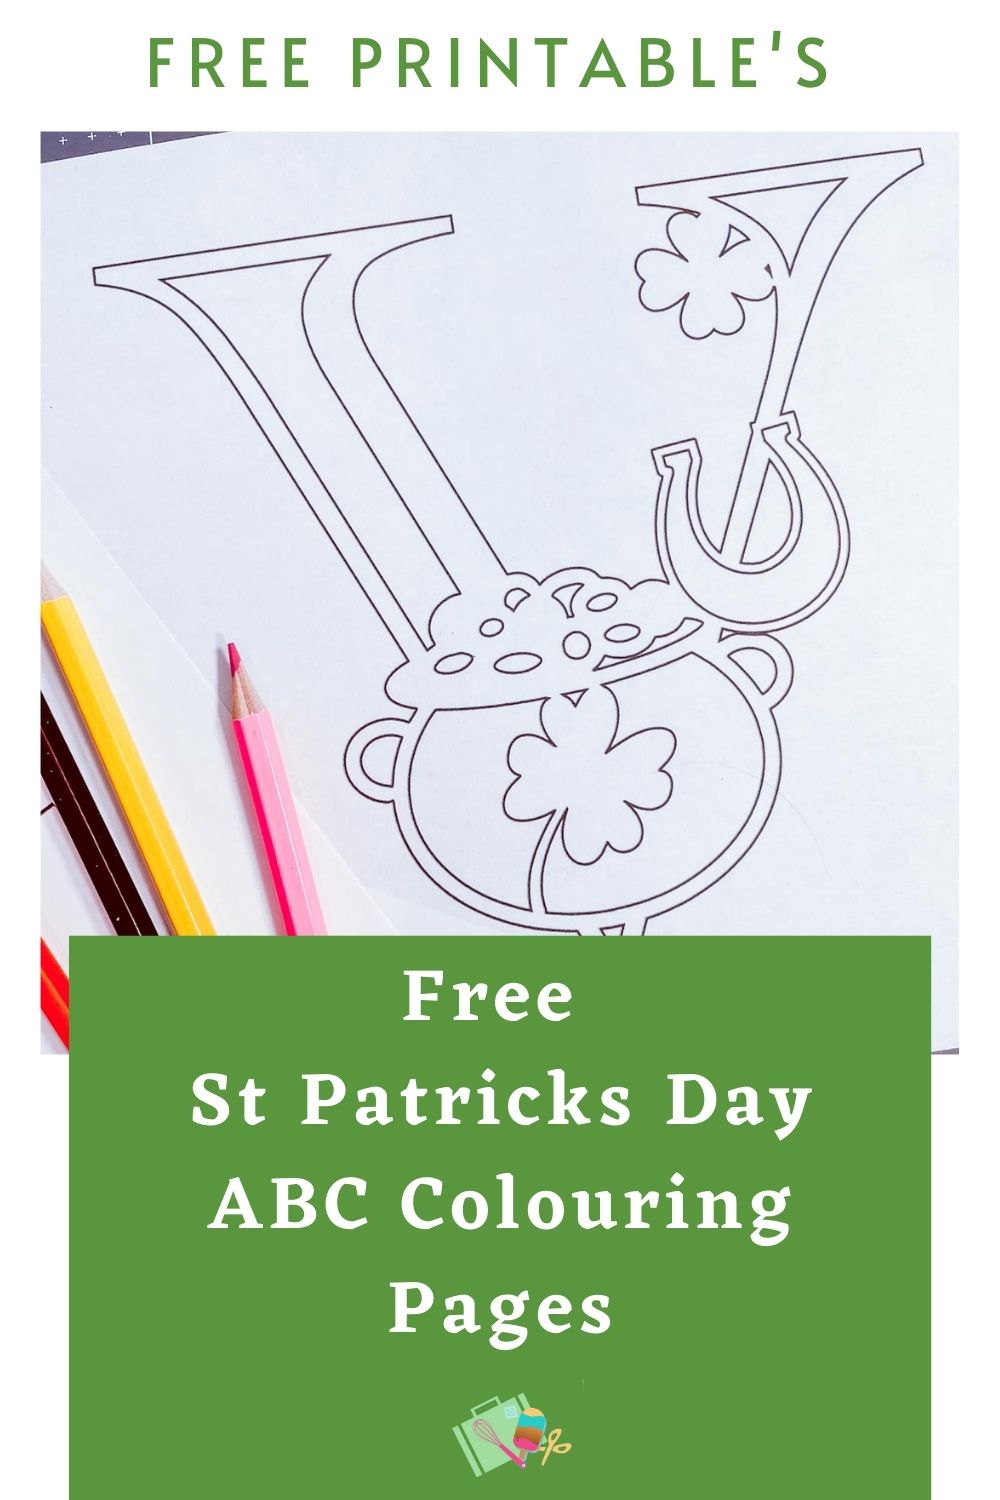 How to make St Patricks Day Maths Games and Free St Patricks Day Colouring Pages